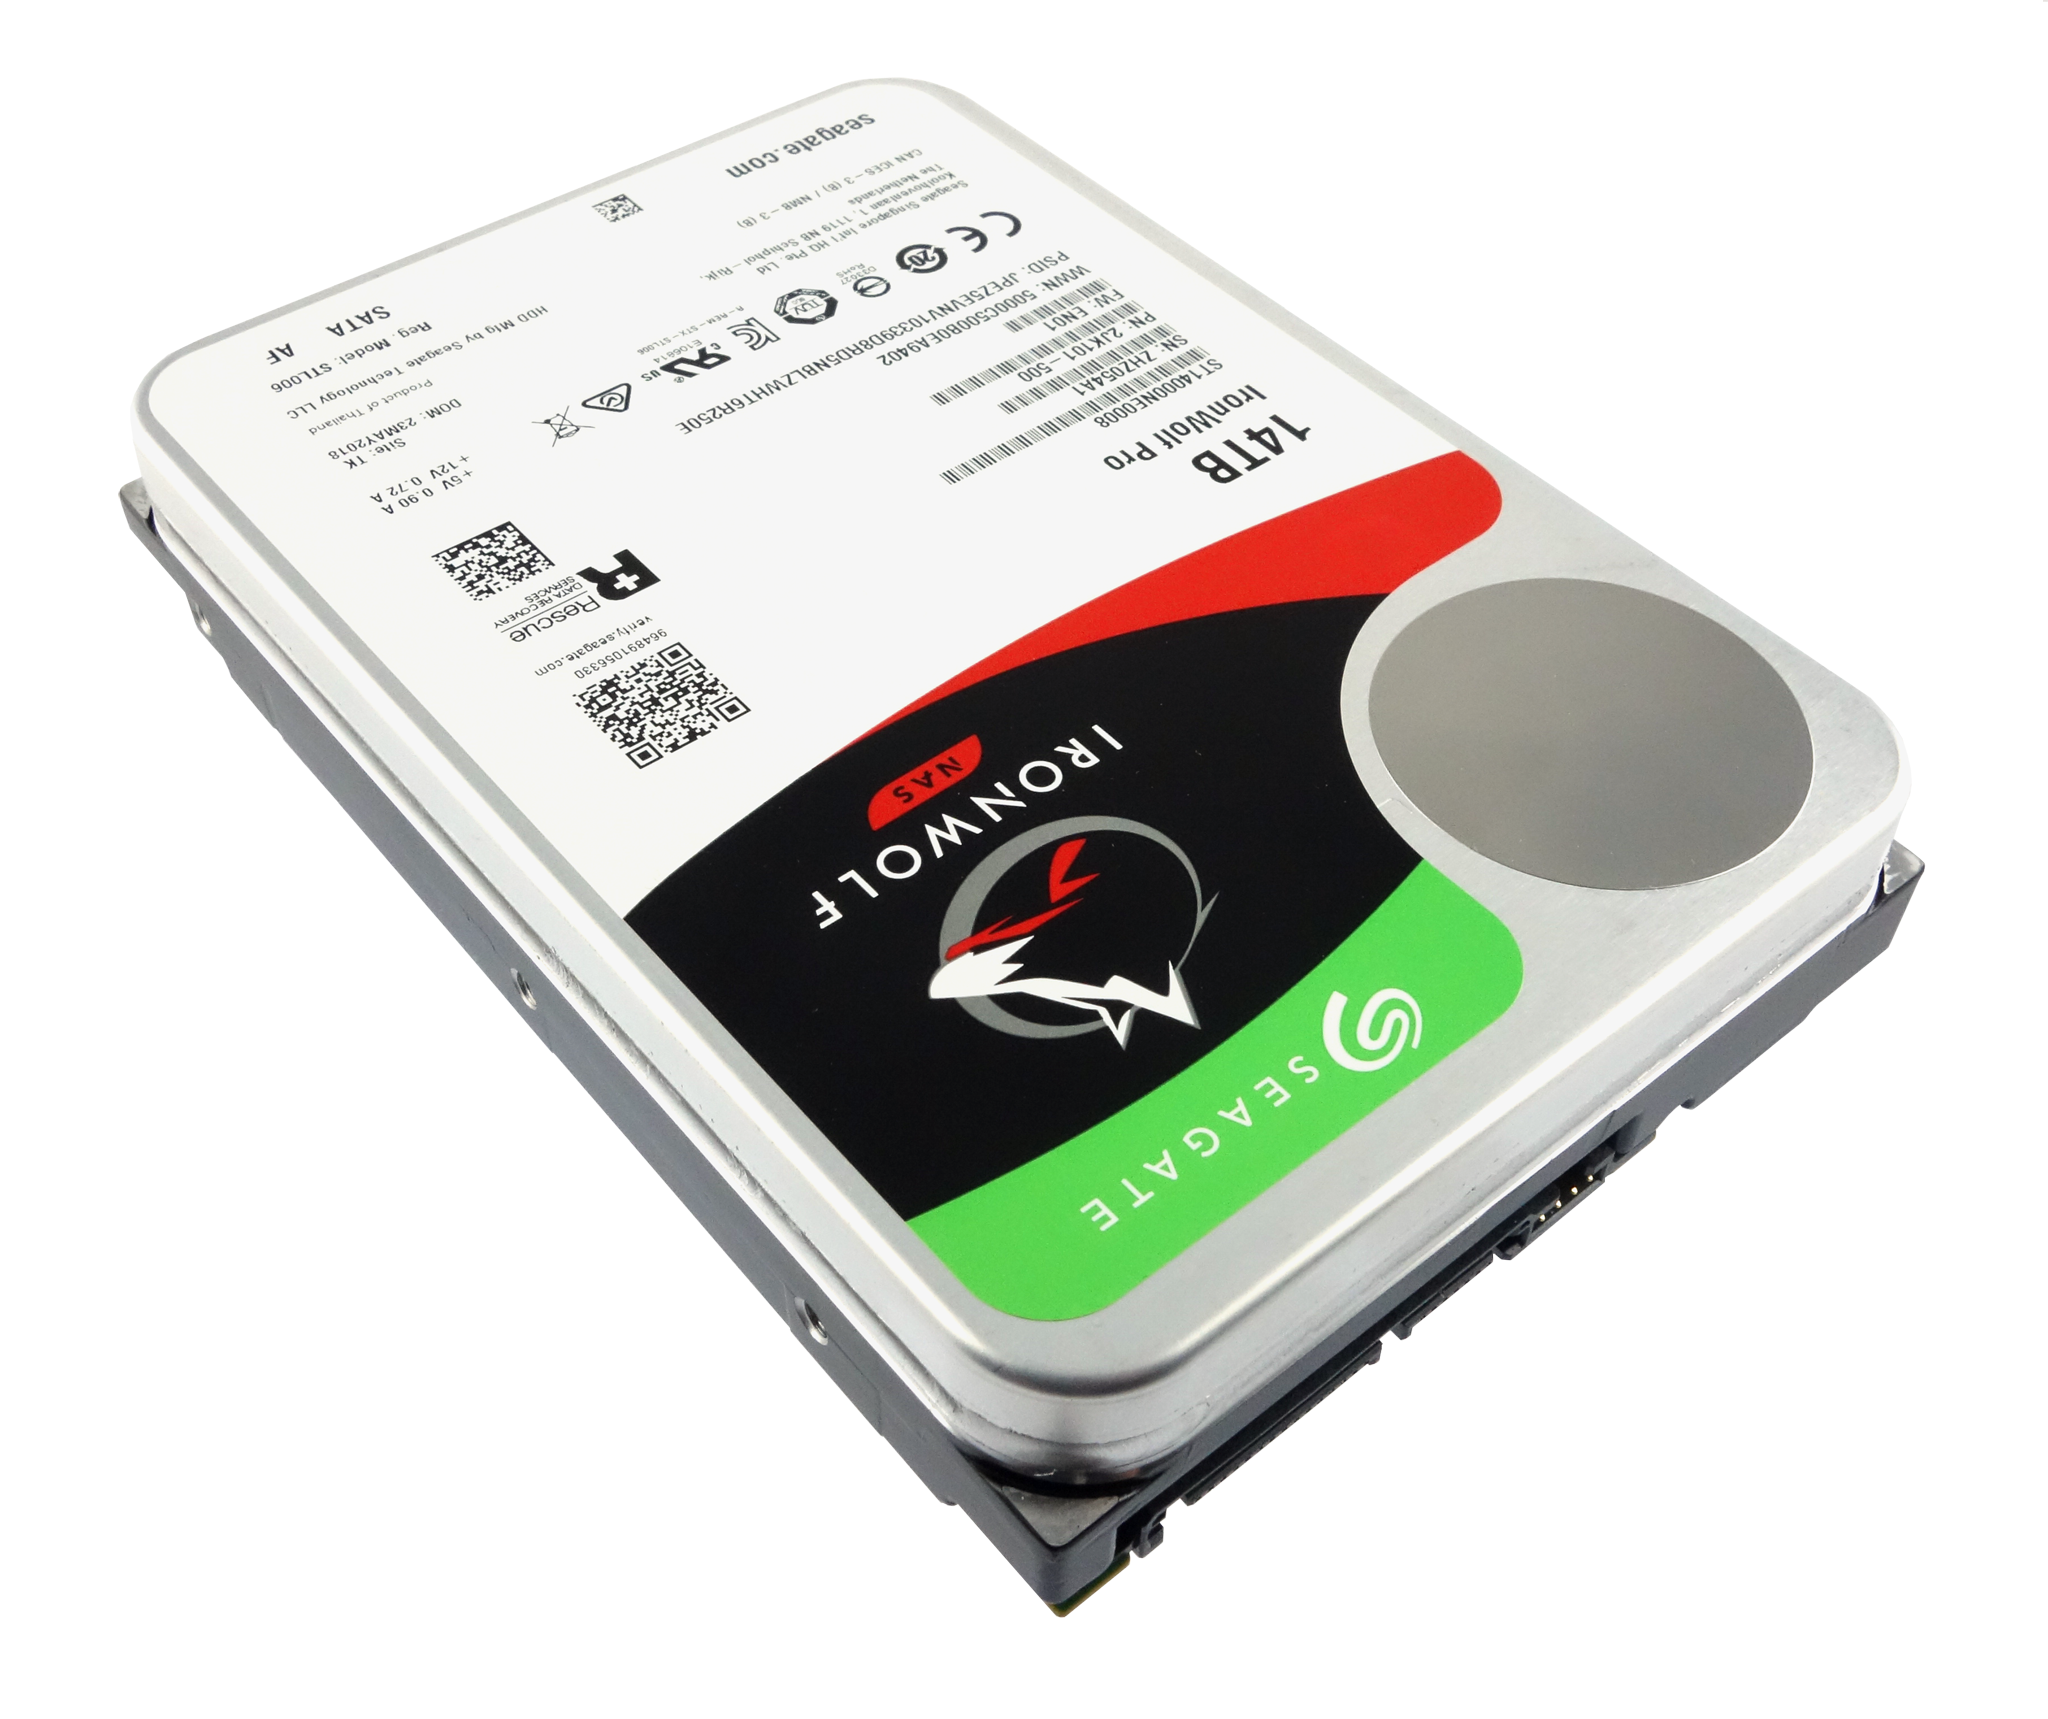 Seagate IronWolf Pro 14TB Review